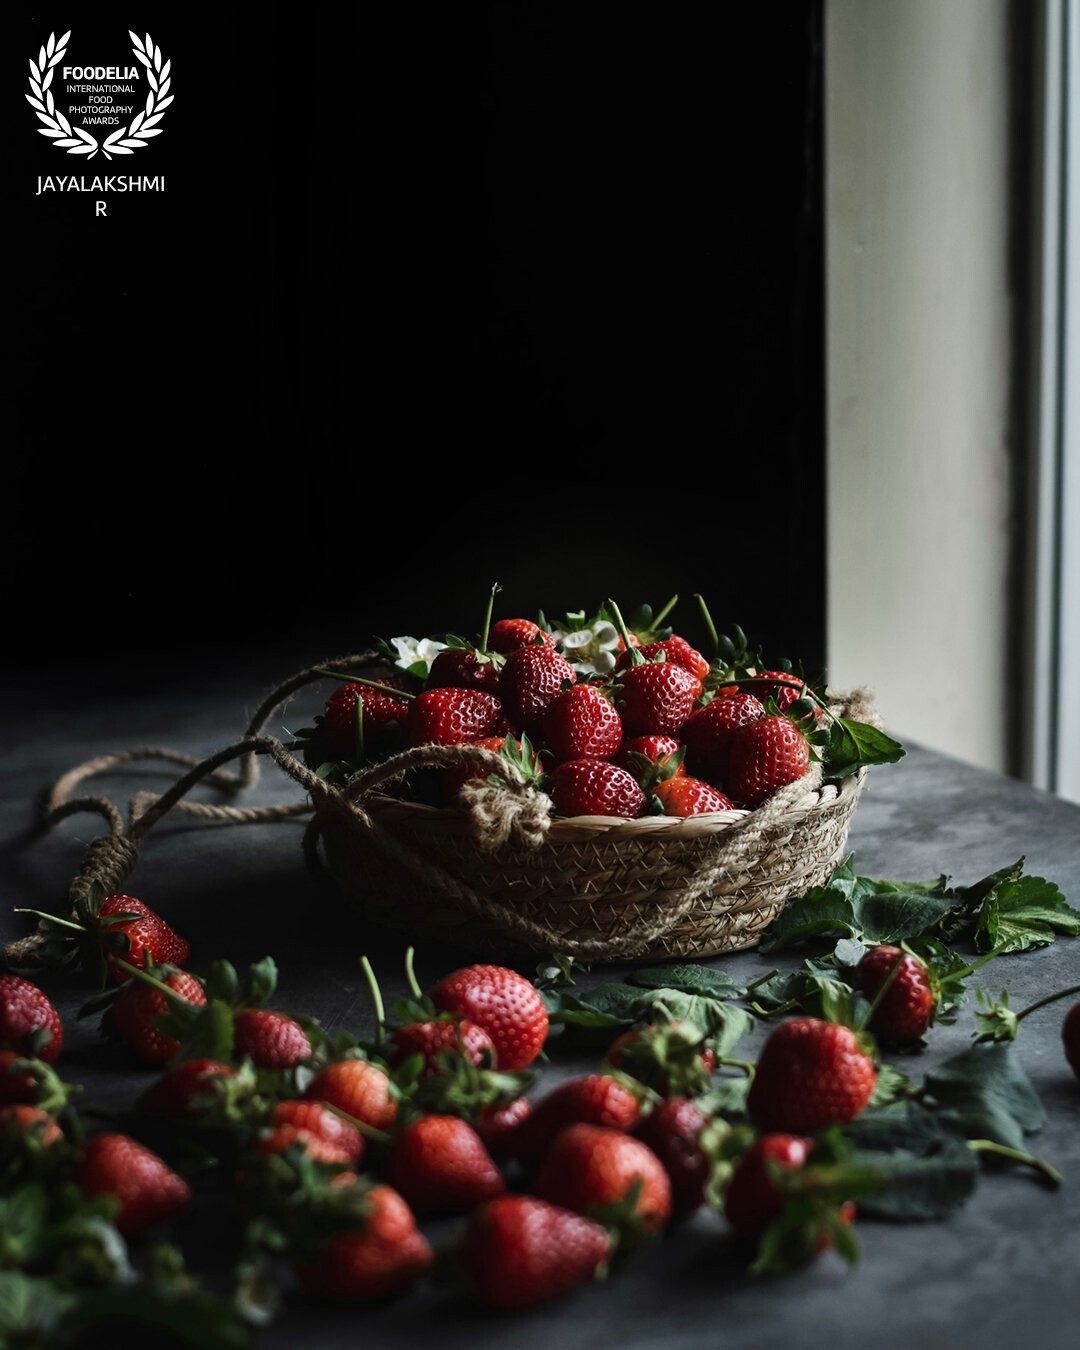 Farm fresh strawberries .Tried to showcase freshly picked strawberries in a moody setup against a window , shot in natural light .